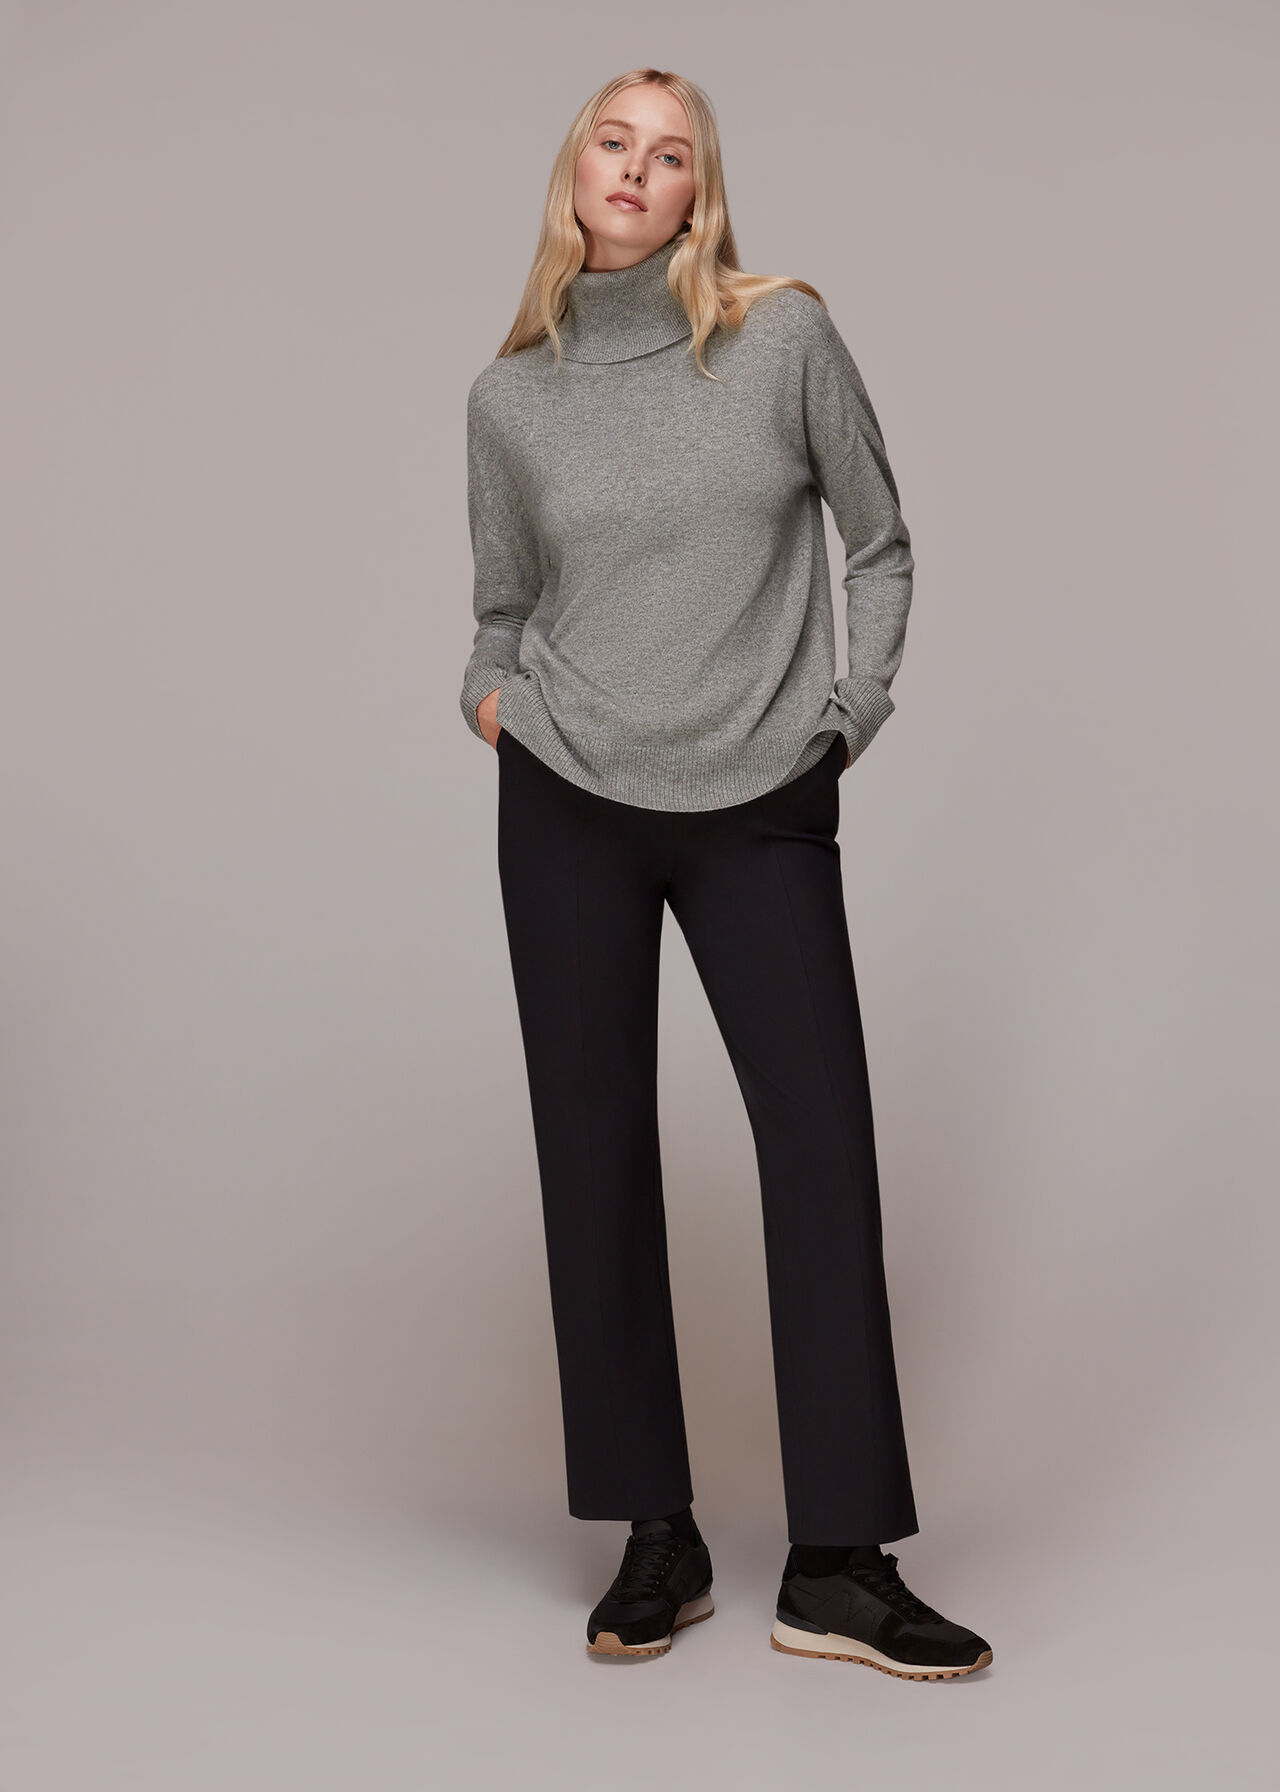 Shop the Grey Cashmere Roll Neck Jumper at Whistles | Whistles UK